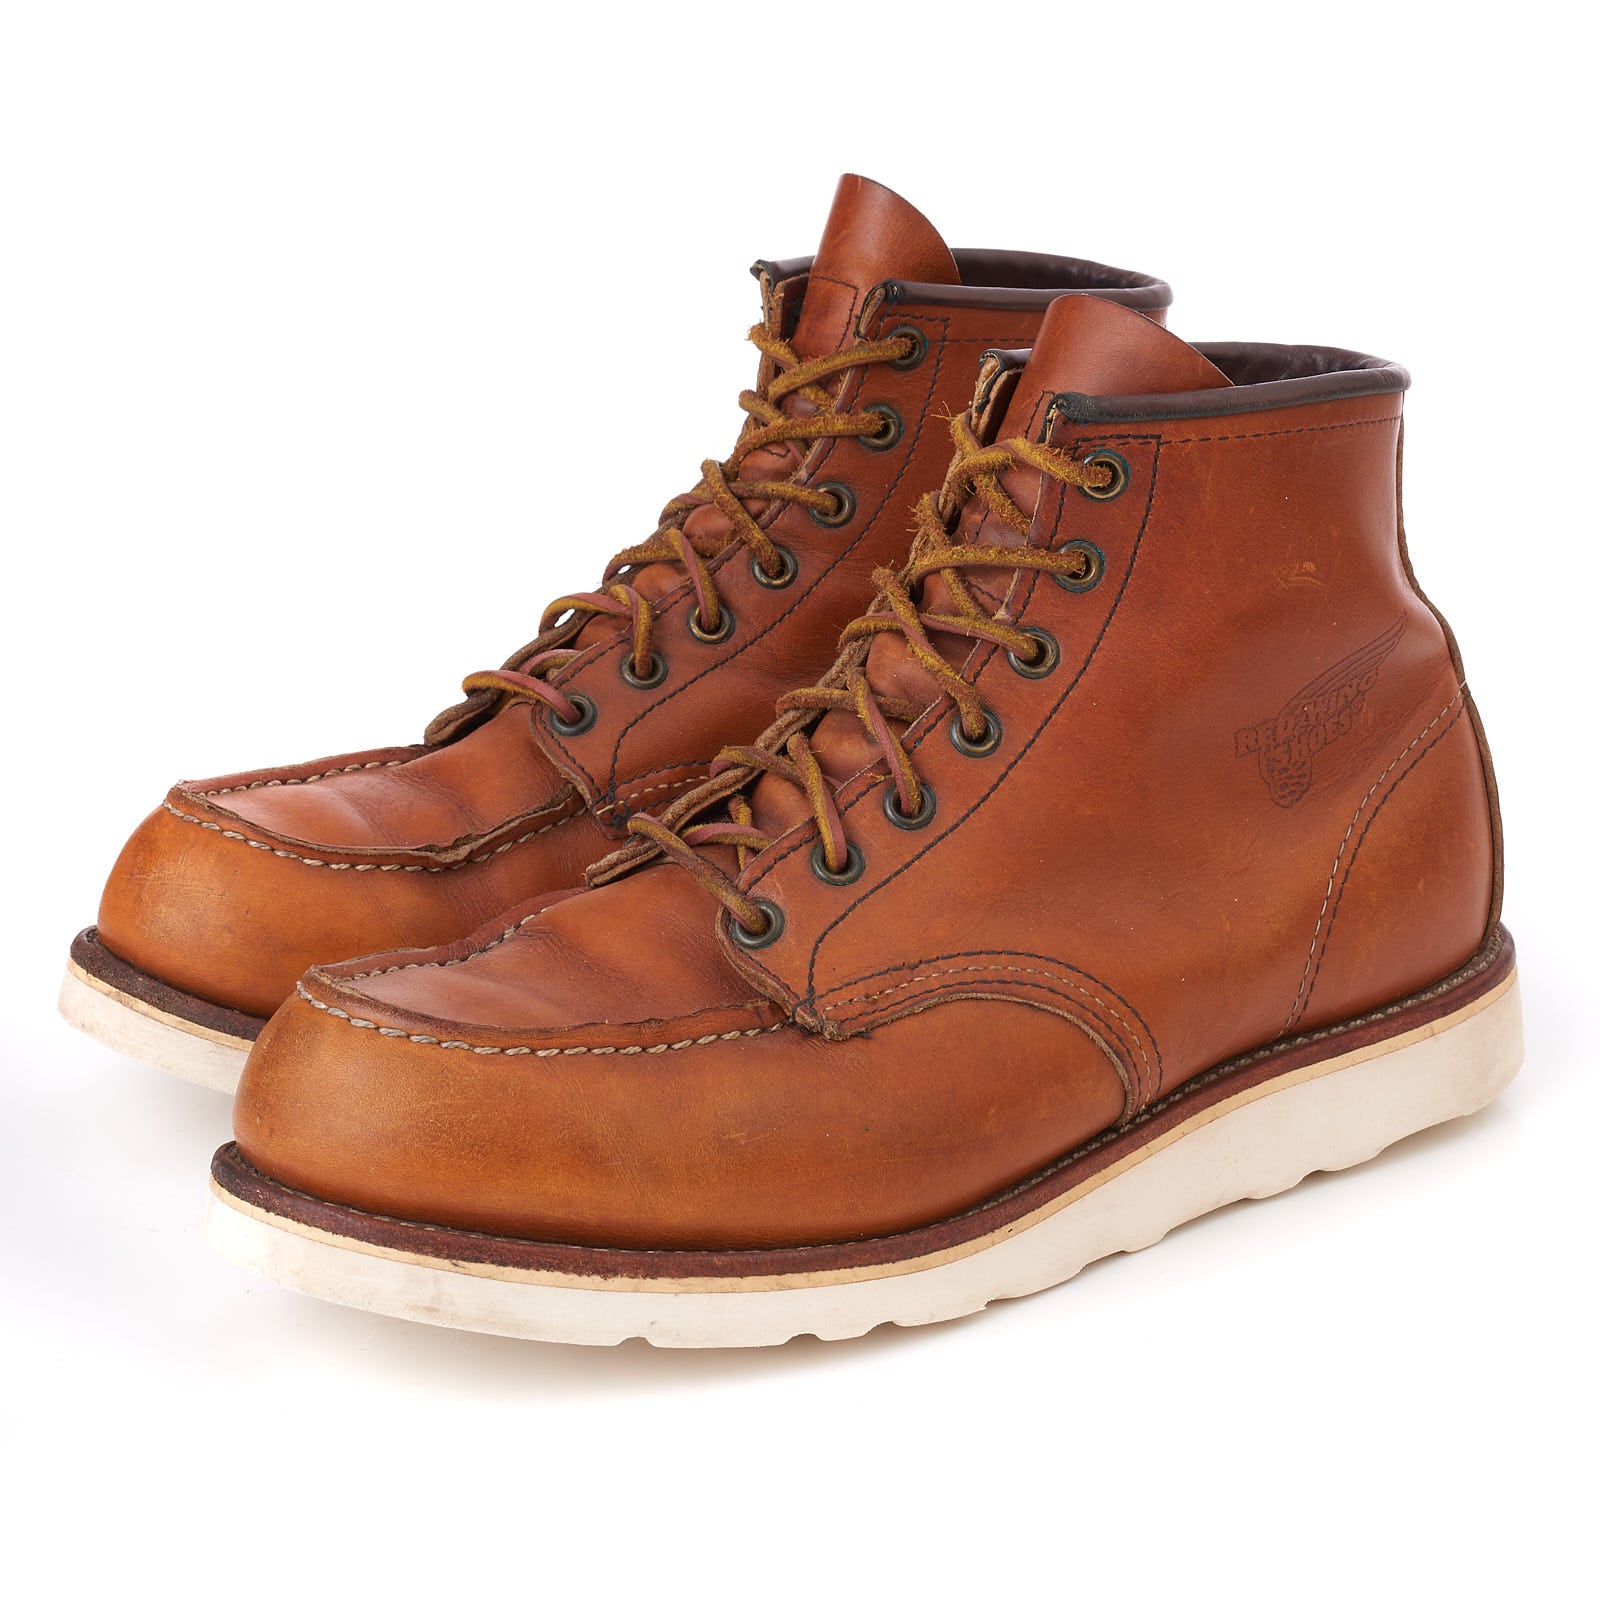 Vintage RED WING 875 Classic Moc Toe Boots with Vibram Outsole US 10